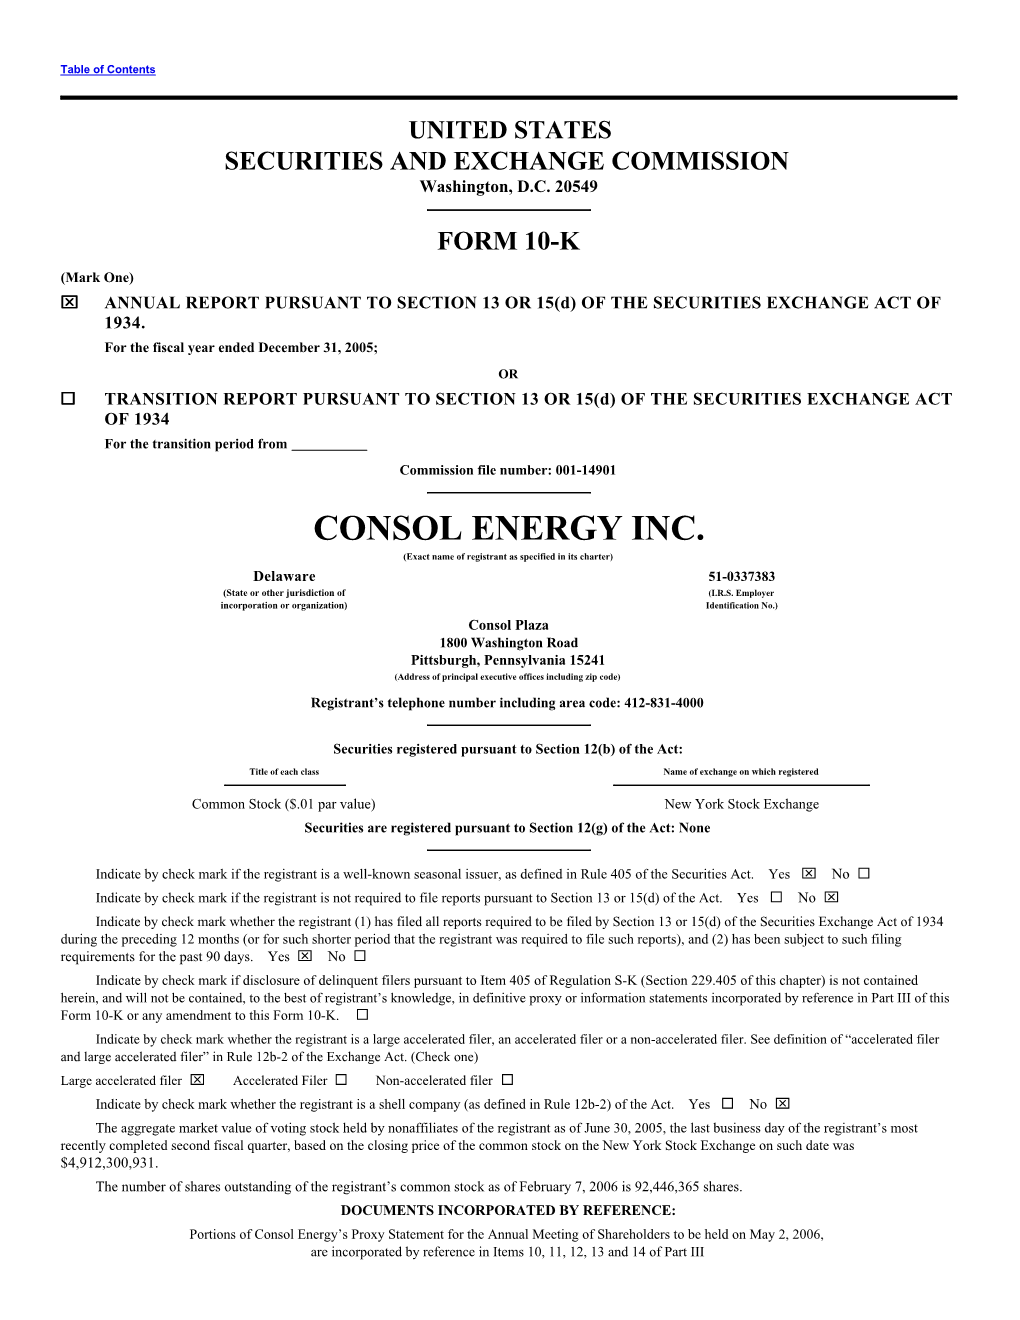 CONSOL ENERGY INC. (Exact Name of Registrant As Specified in Its Charter)